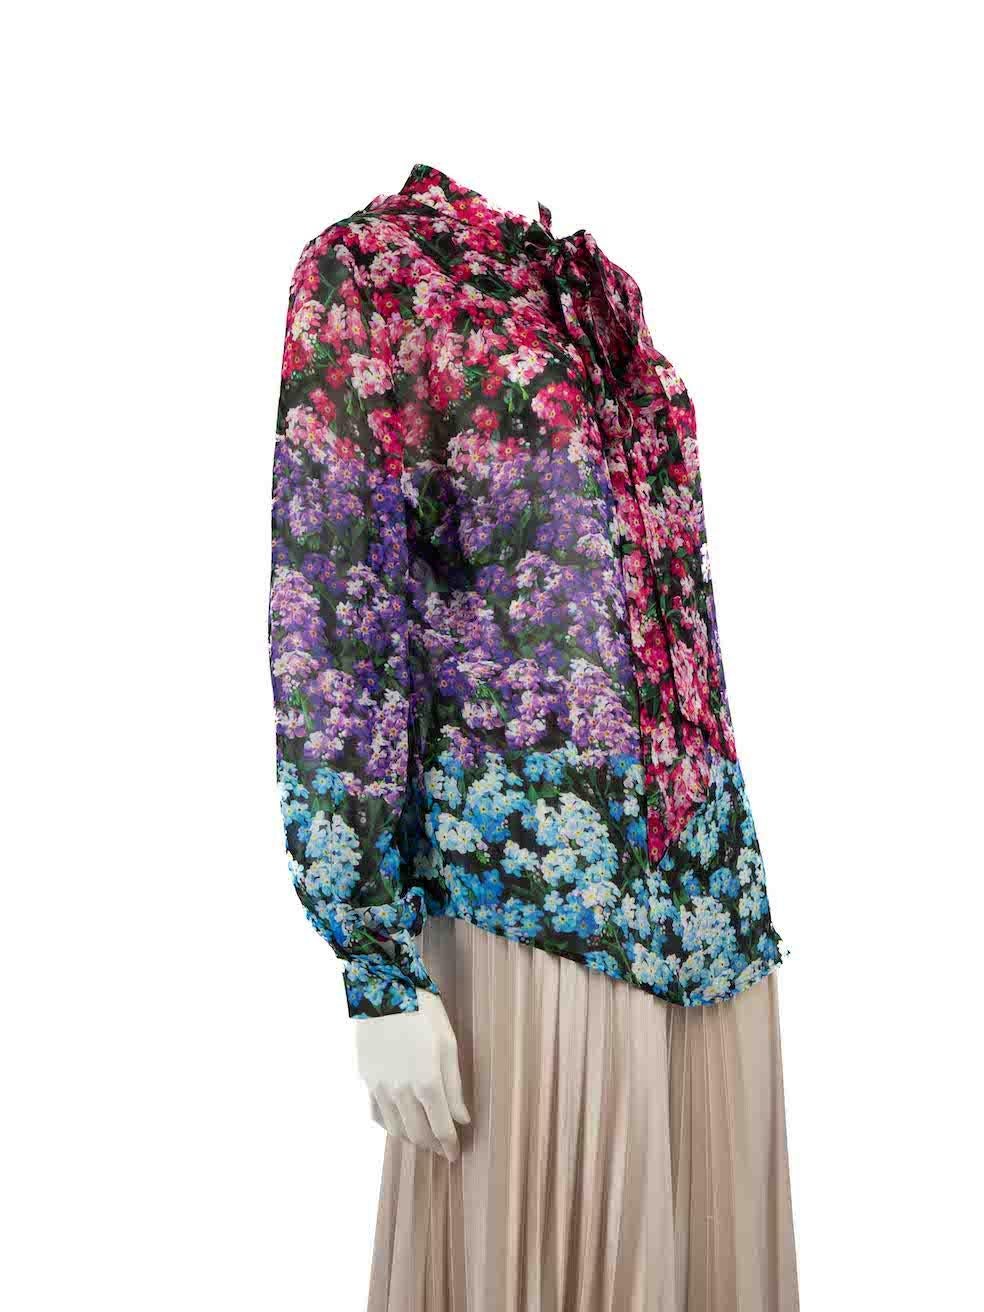 CONDITION is Very good. Hardly any visible wear to blouse is evident. Missing button to front of blouse can be seen on this used Mary Katrantzou designer resale item.
 
Details
Multicolour- pink, purple and blue
Silk
Long sleeves blouse
Sheer
Floral